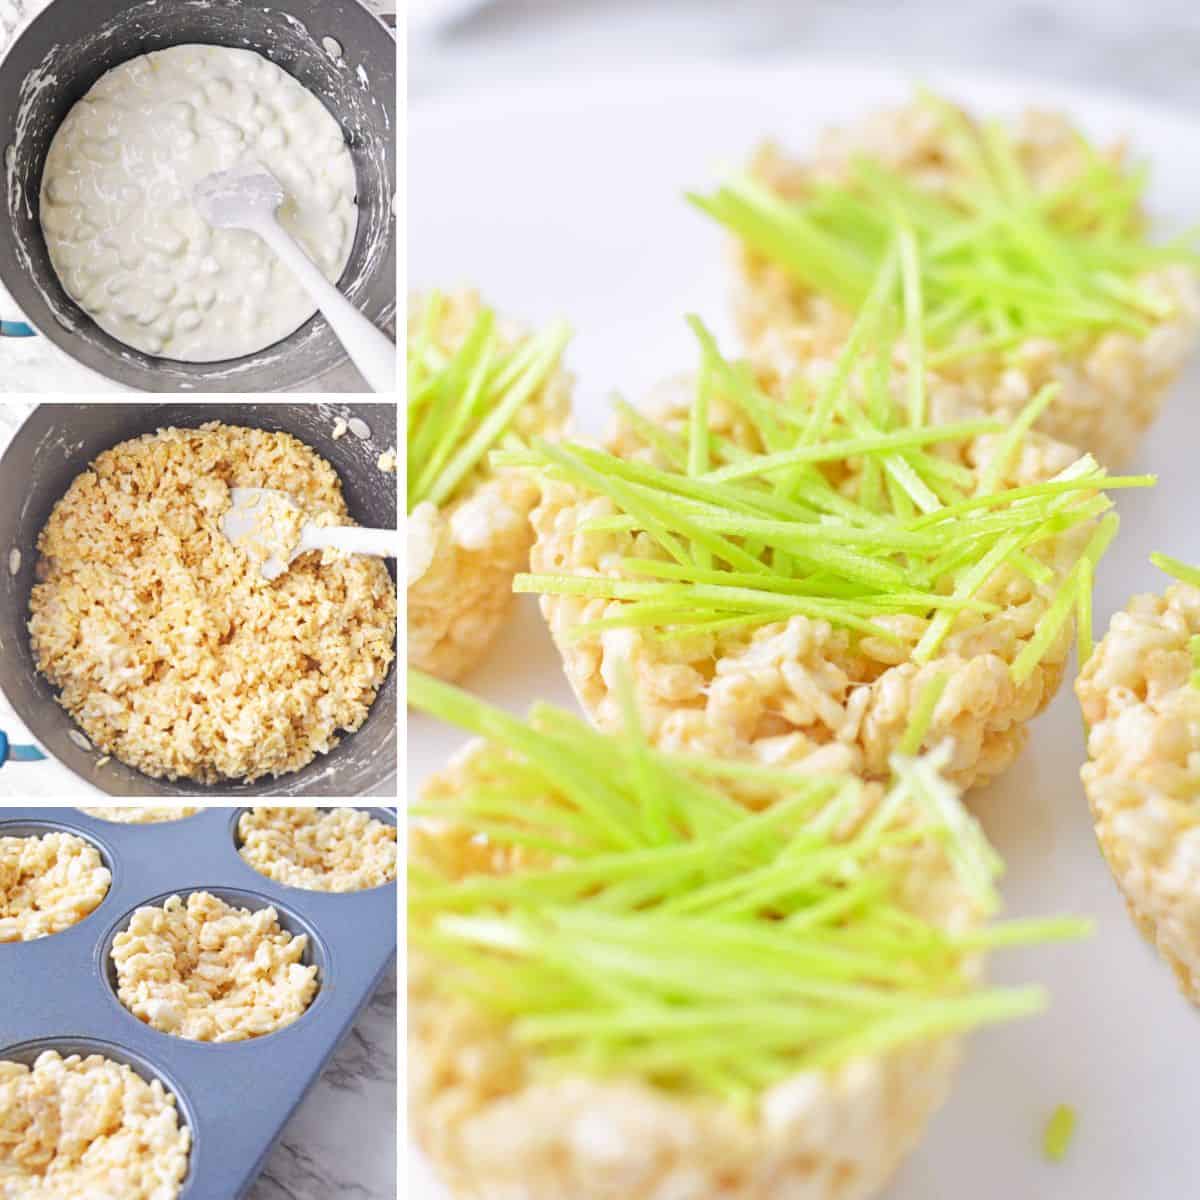 In-process image collage showing a pot with partially melted marshmallows, the pot with Rice Krispies added, the cereal mixture pressed into muffin pan, and the bird's nest removed from the muffin tin and filled with pieces of green grass.